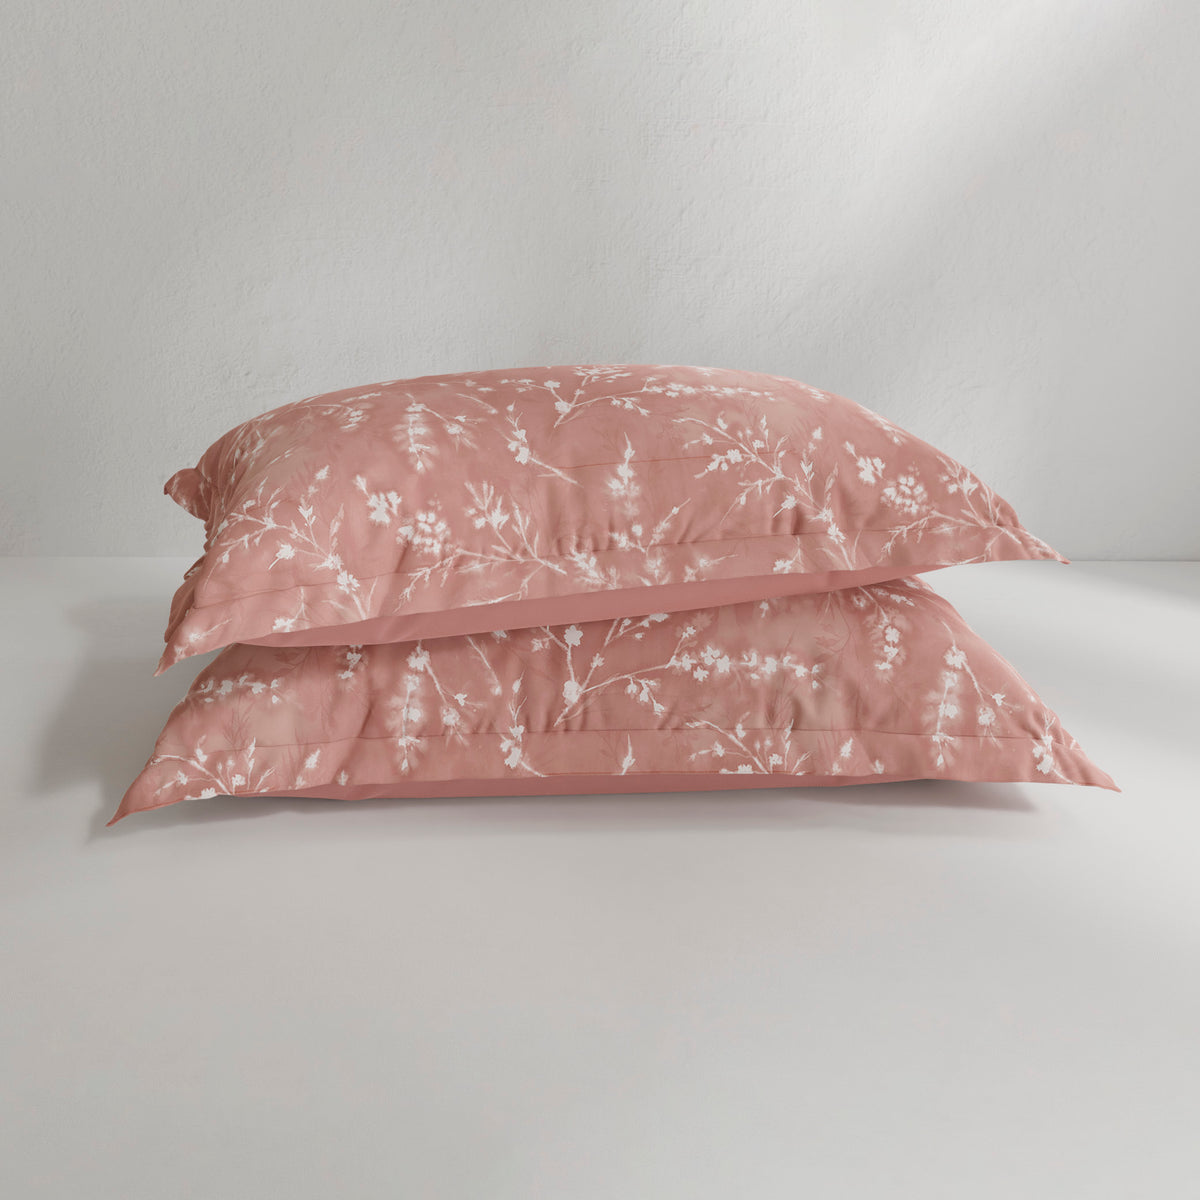 Image of two Floral Ash Rose Pillow Shams on pillows stacked on top of each other with a white background